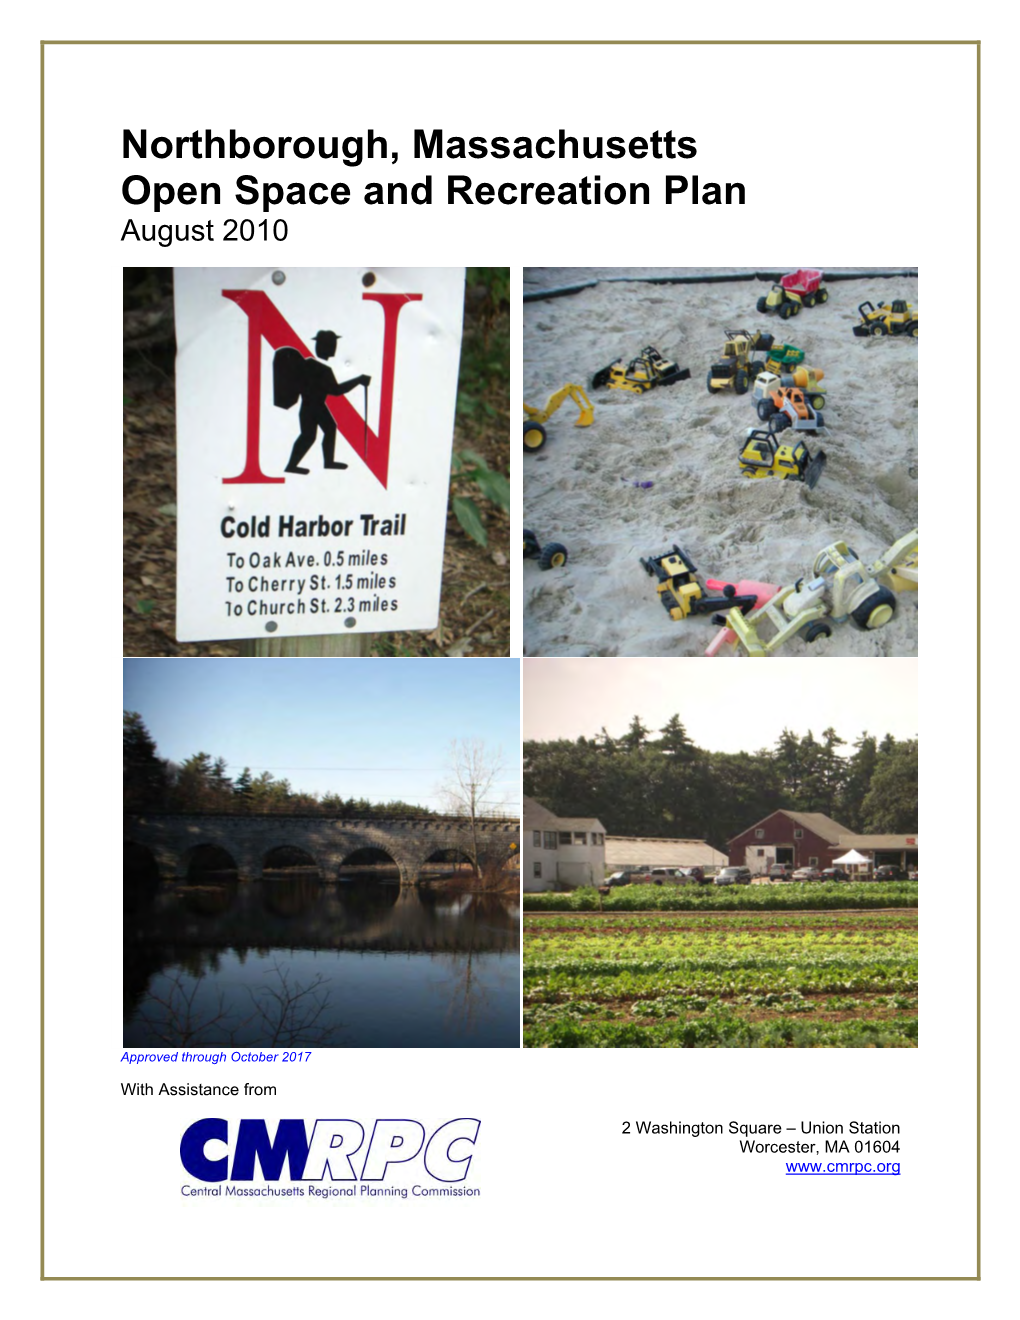 Northborough, Massachusetts Open Space and Recreation Plan August 2010